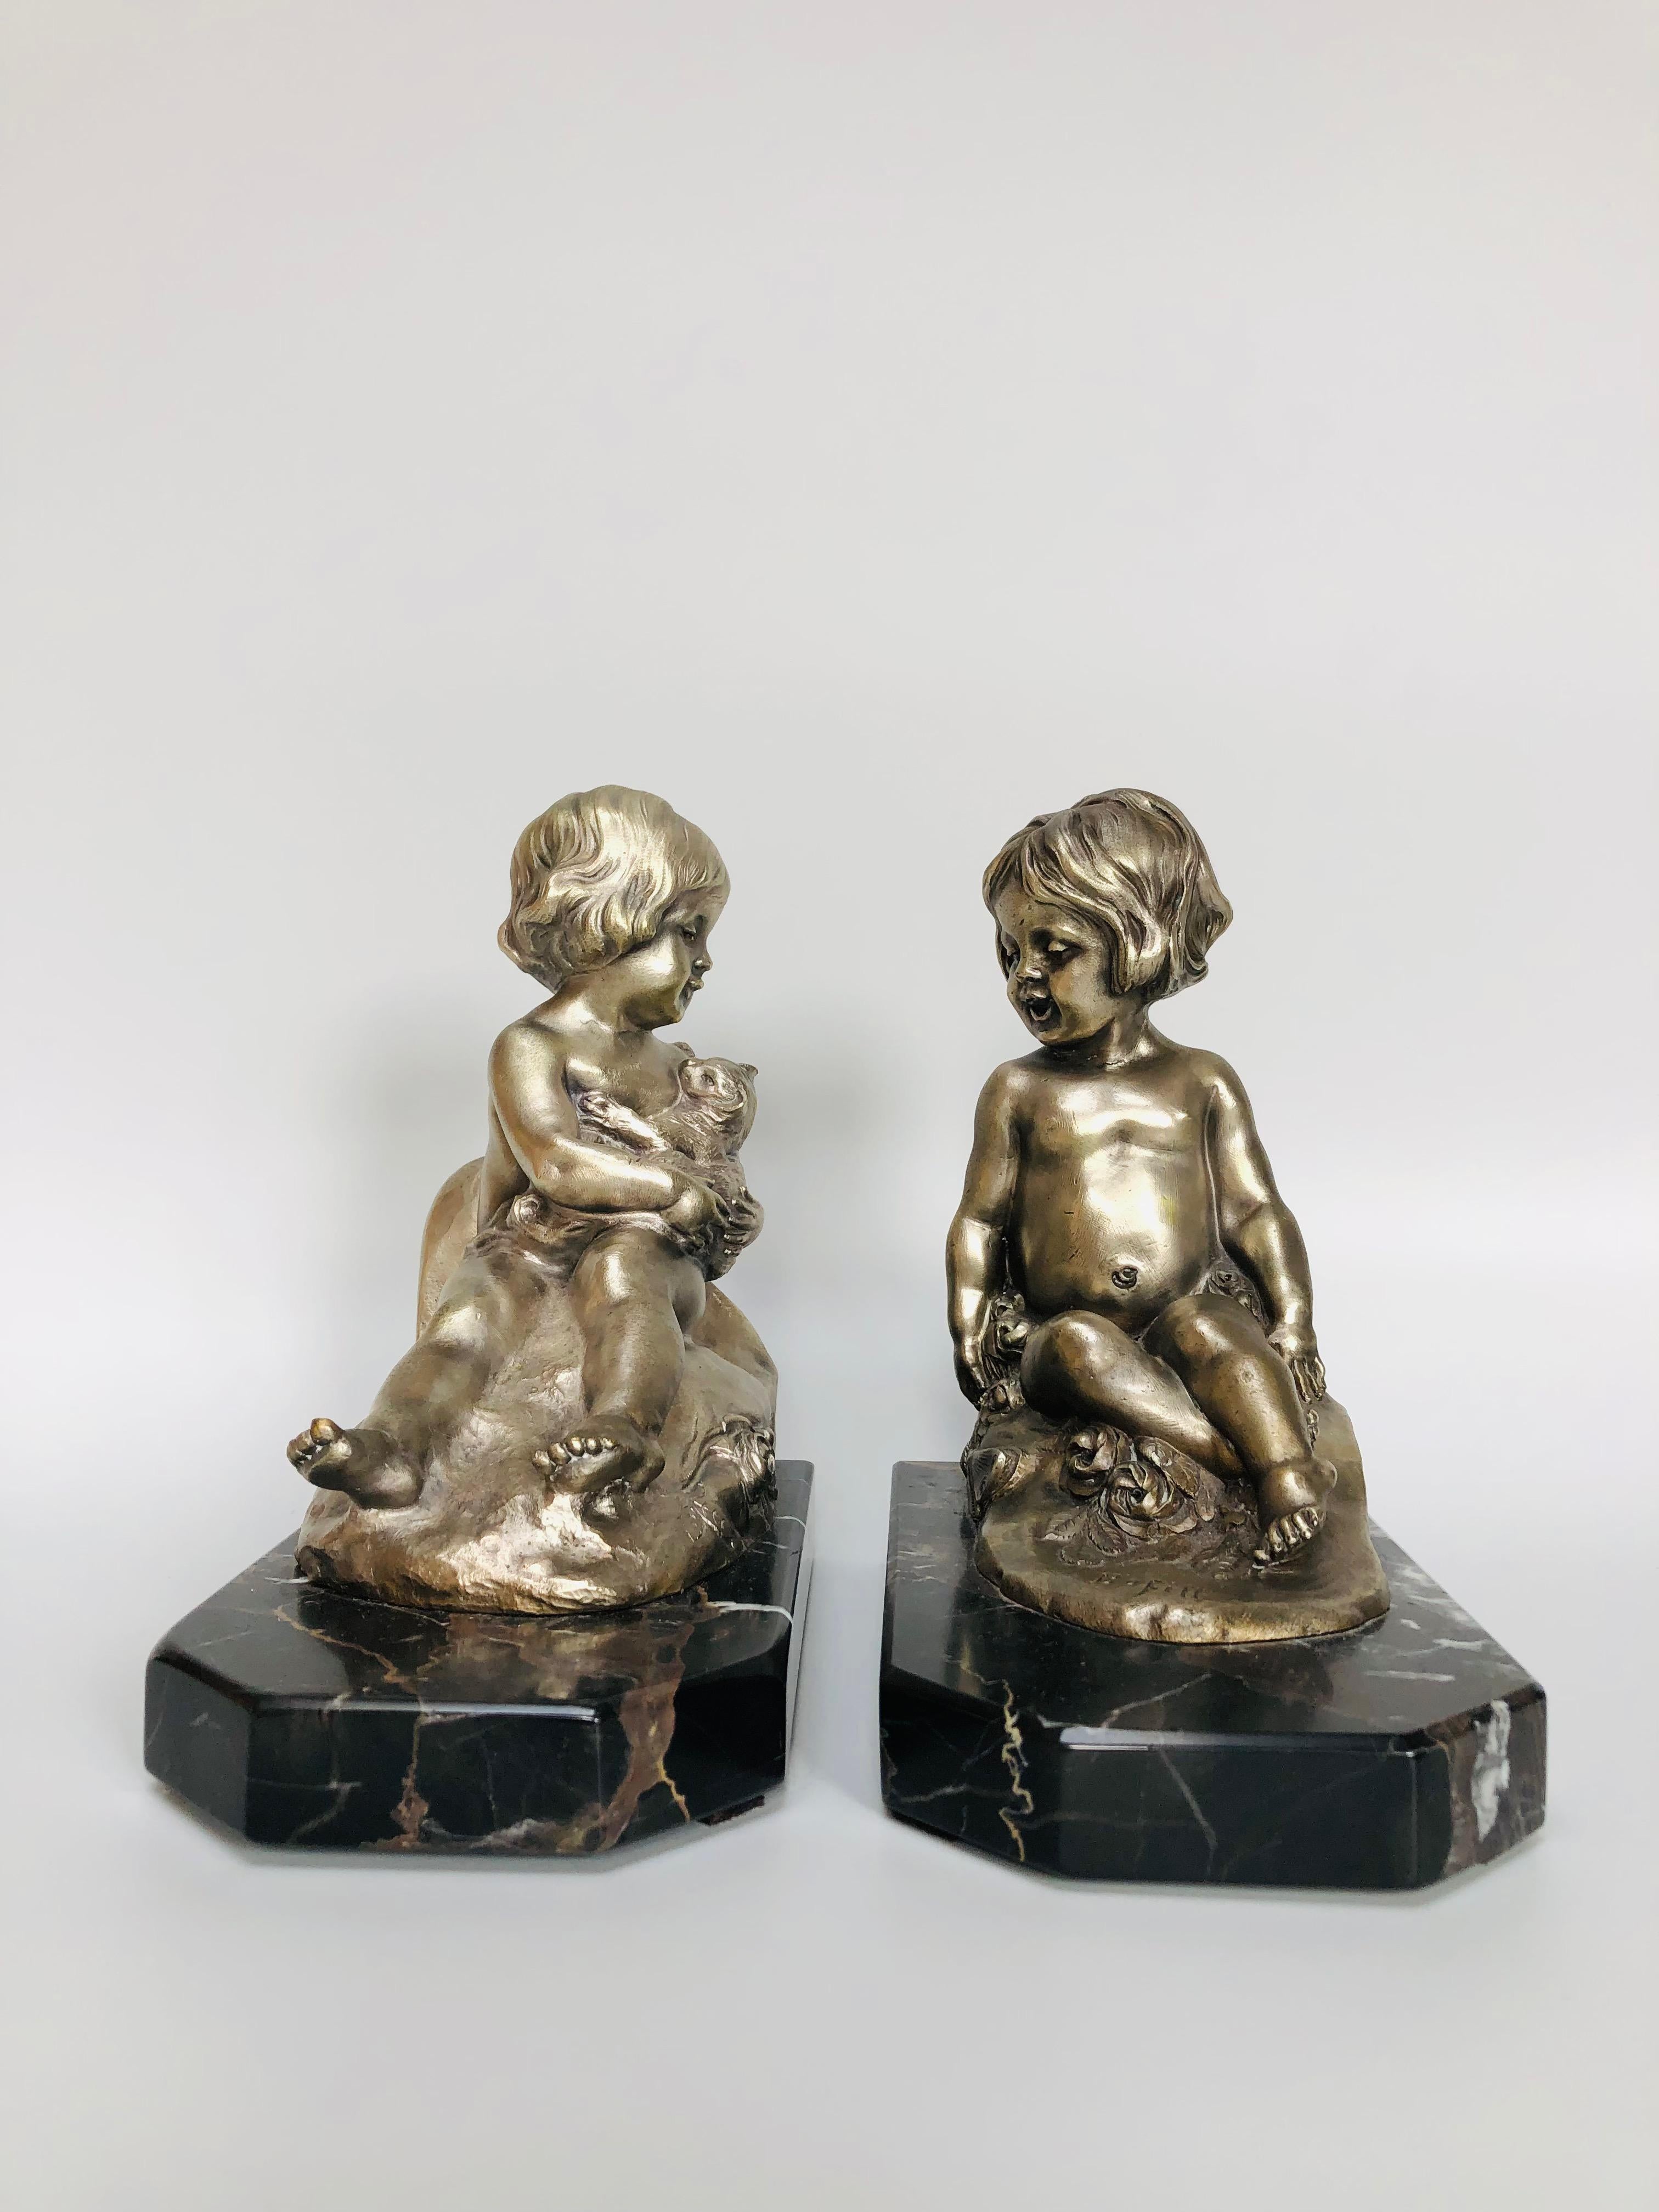 Pair of bookends circa 1920 in silvered bronze on a portor marble base. Signed Bofill (Antoine Bofill- 1875- 1925).
In perfect condition.
Measures: Length: 17cm
Width: 10cm
Height: 17.5cm
Weight: 5 Kg

Antonio Bofill-Conill said Antoine